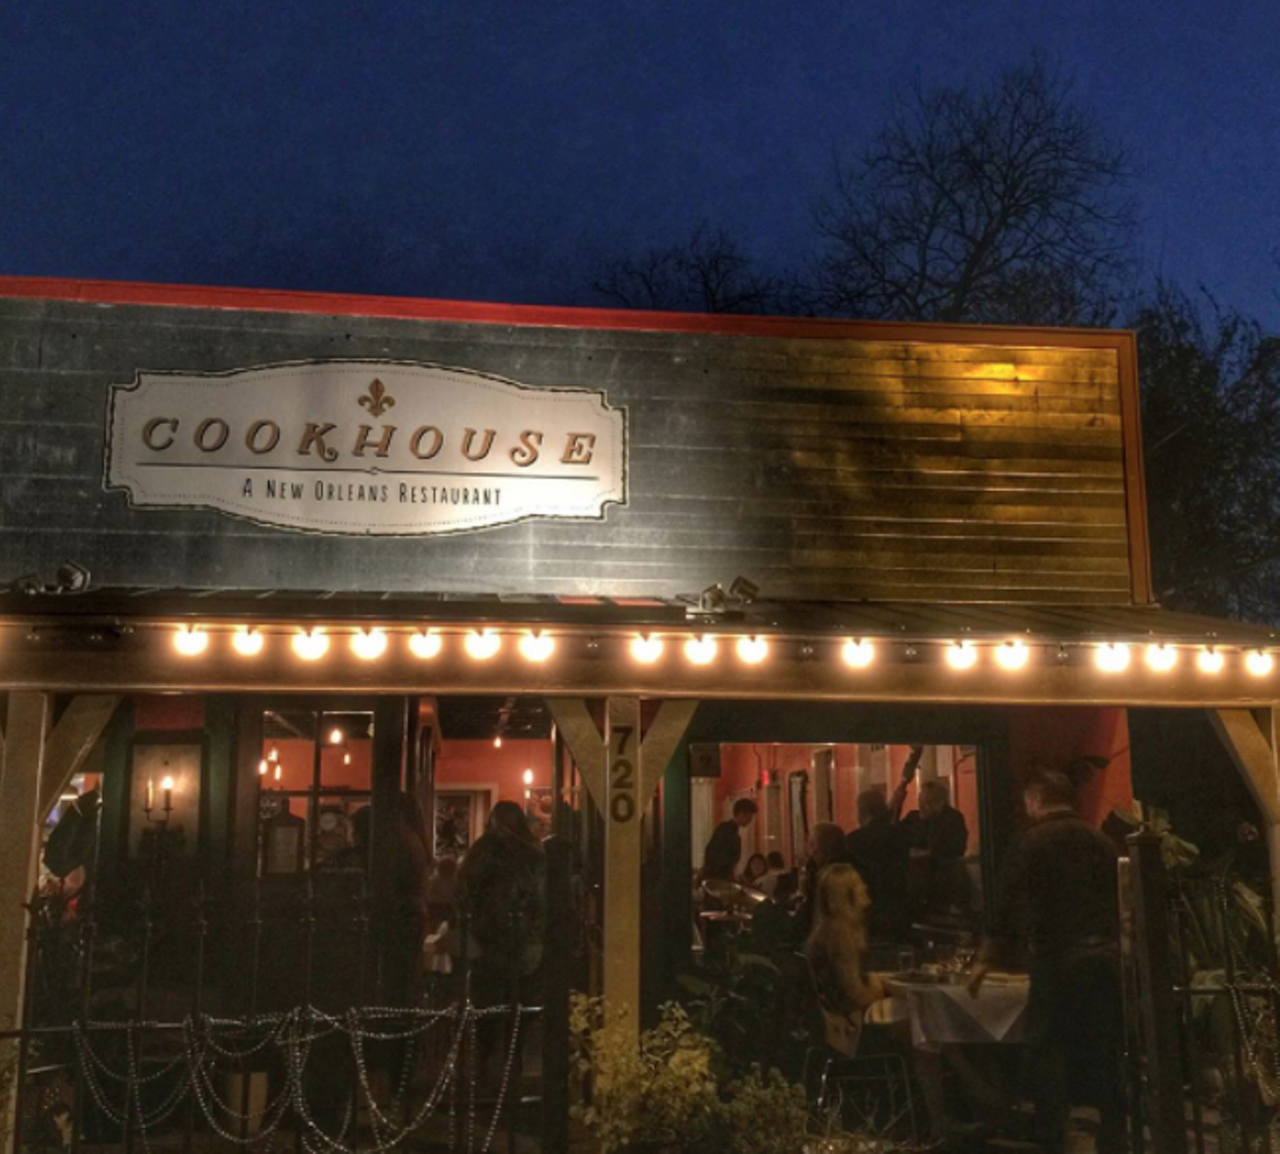 The Cookhouse
720 E Mistletoe Ave, (210) 320-8211, cookhouserestaurant.com
Modern Cajun and Creole food is always available at the Cookhouse, and that includes crawfish at times. The menu is seasonal, so be sure to check in to see when crawfish is available here so you can get some of that good good.
Photo via Instagram / bill.macfadyen